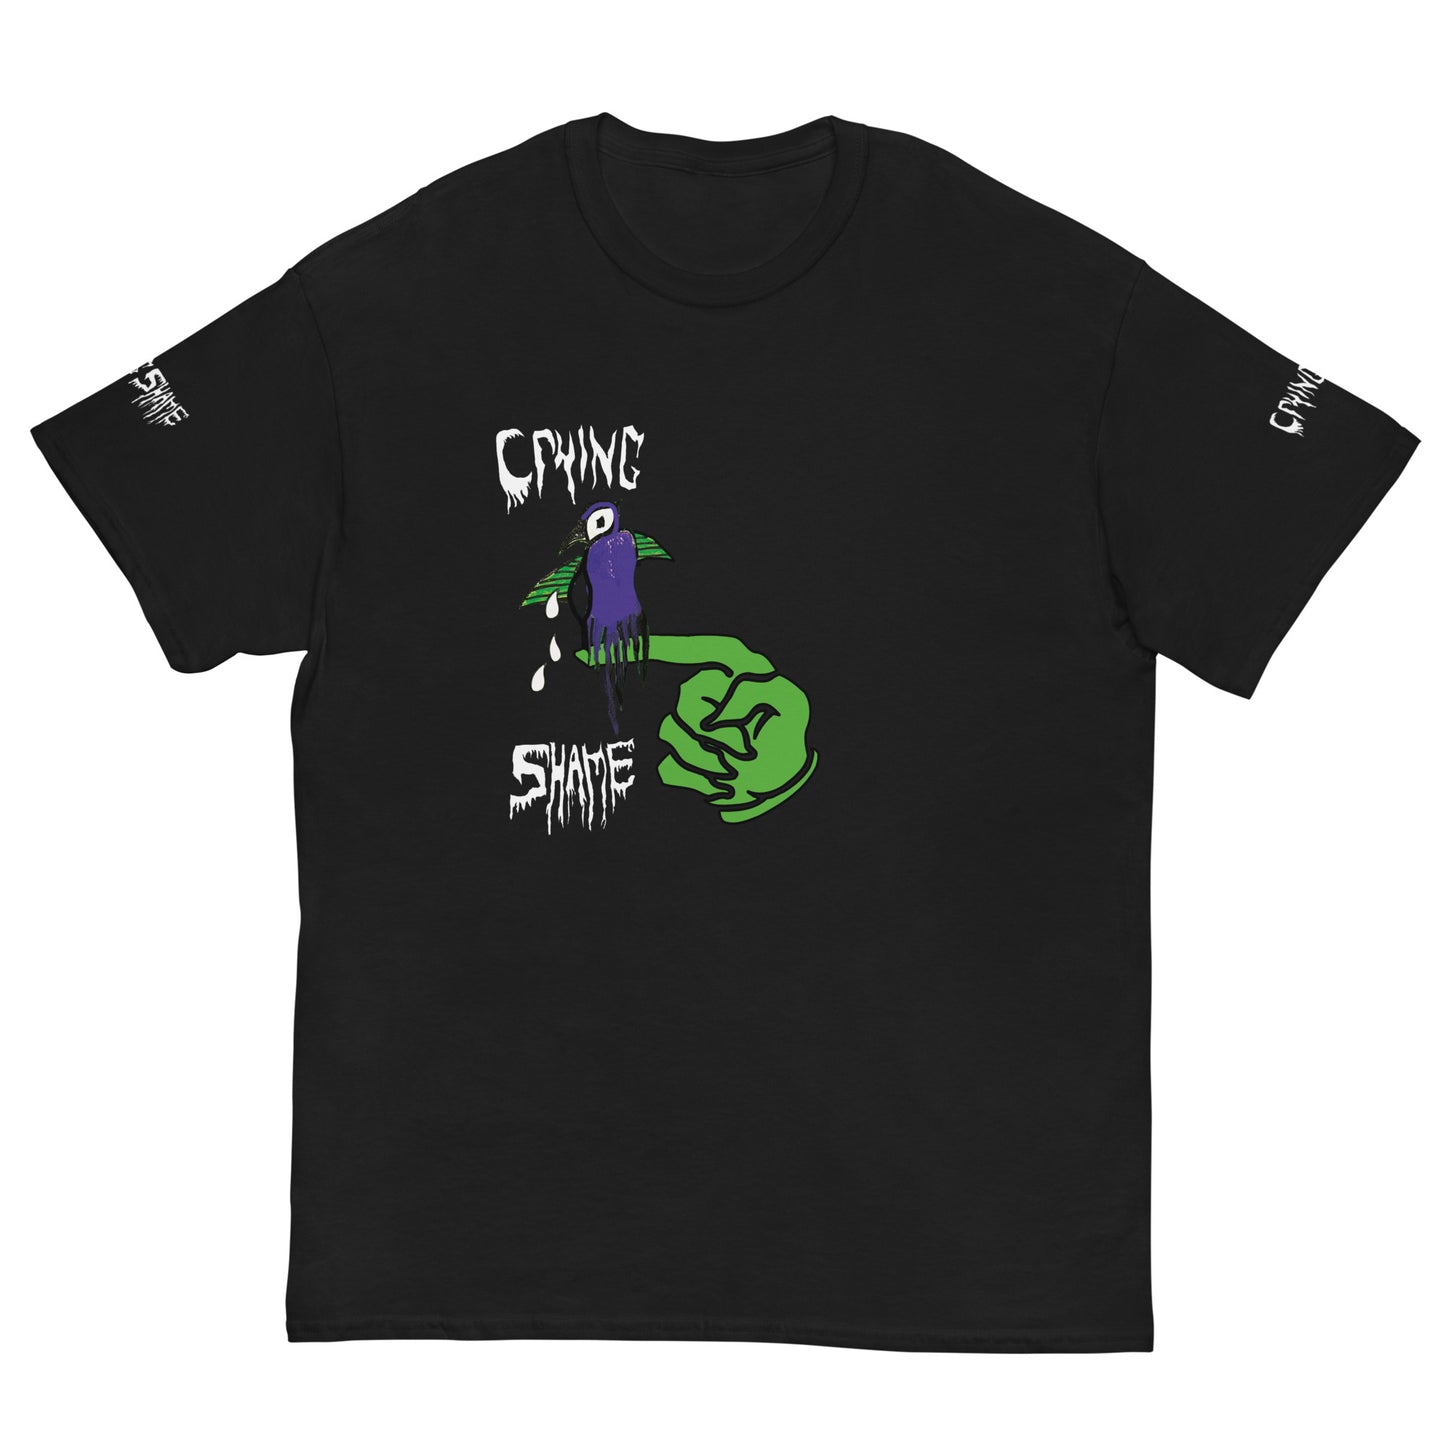 Crying Shame Green Finger - Men's classic cotton tee